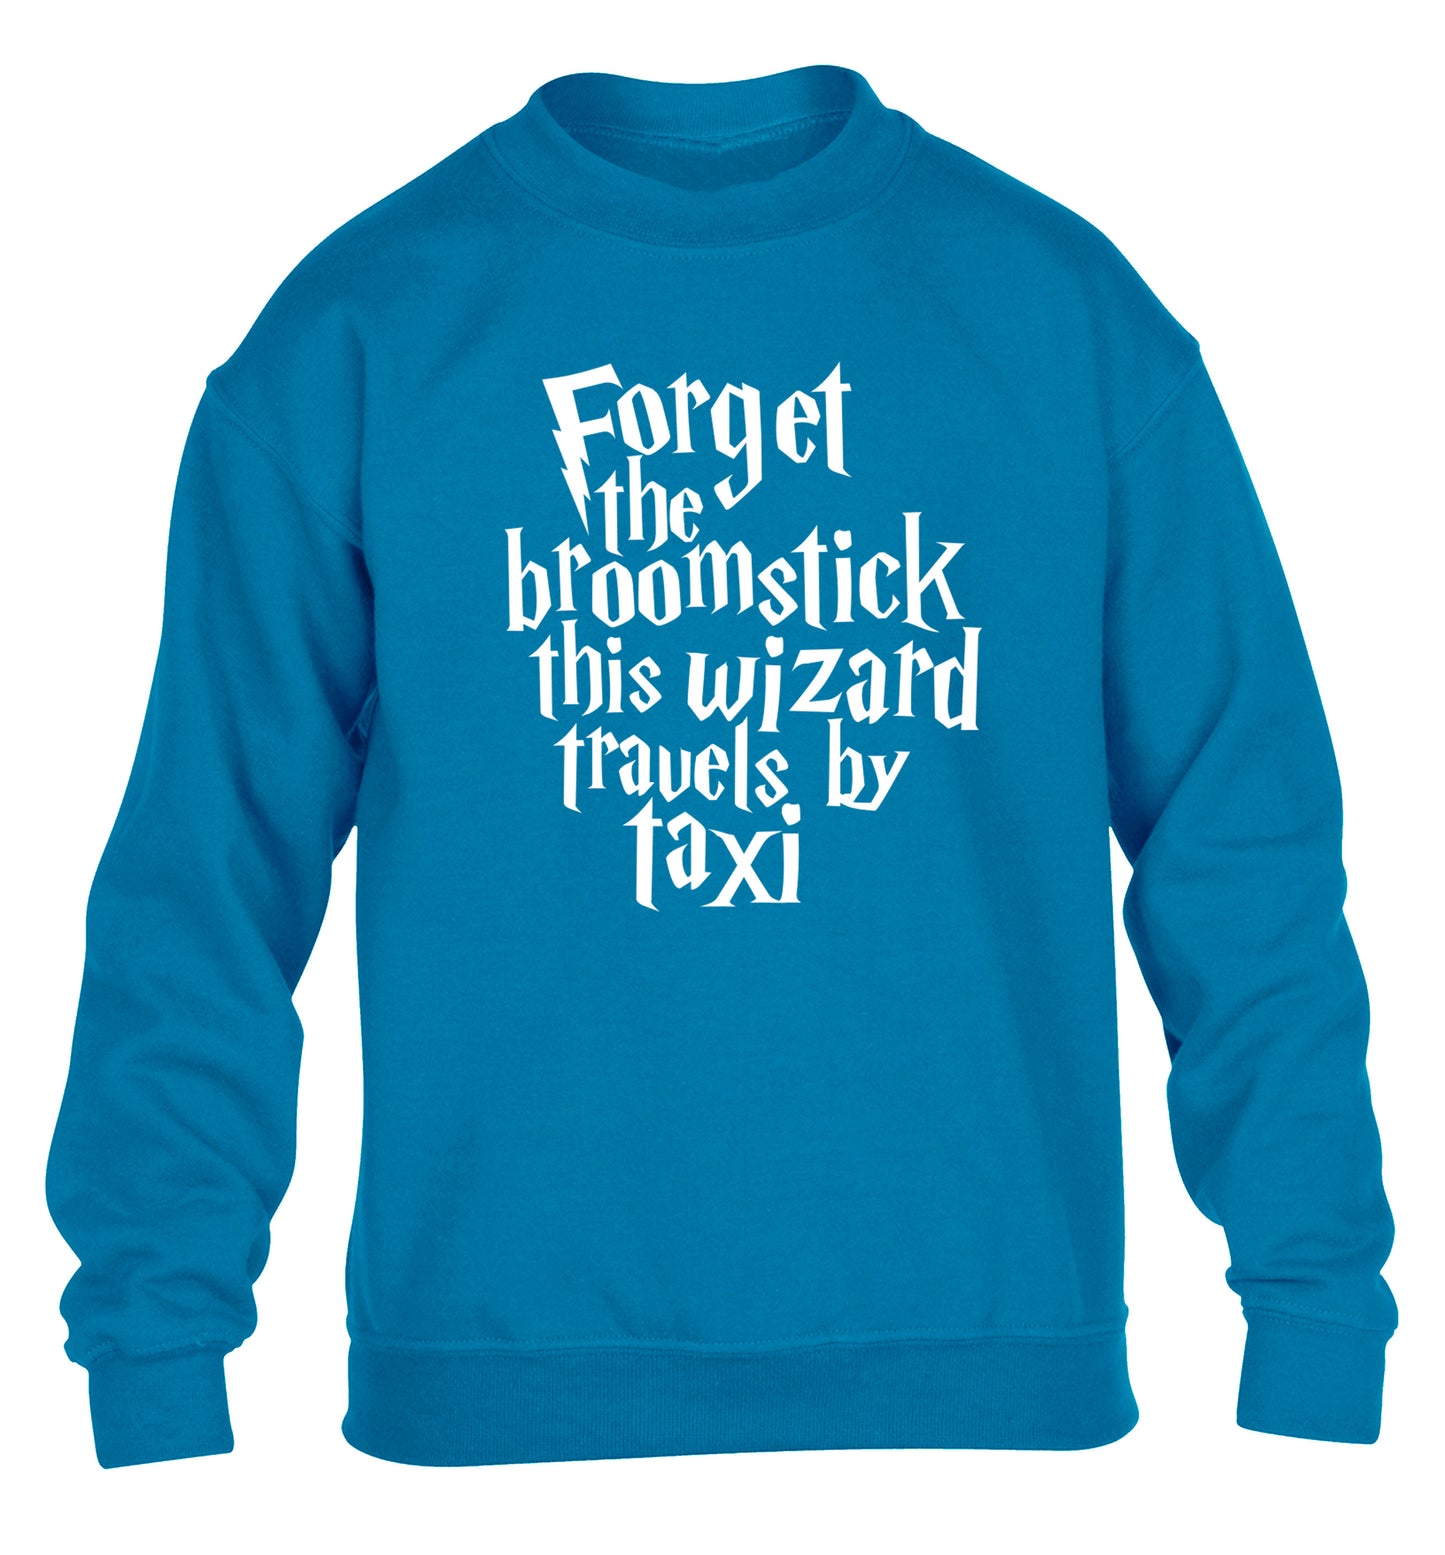 Forget the broomstick this wizard travels by taxi children's blue sweater 12-14 Years